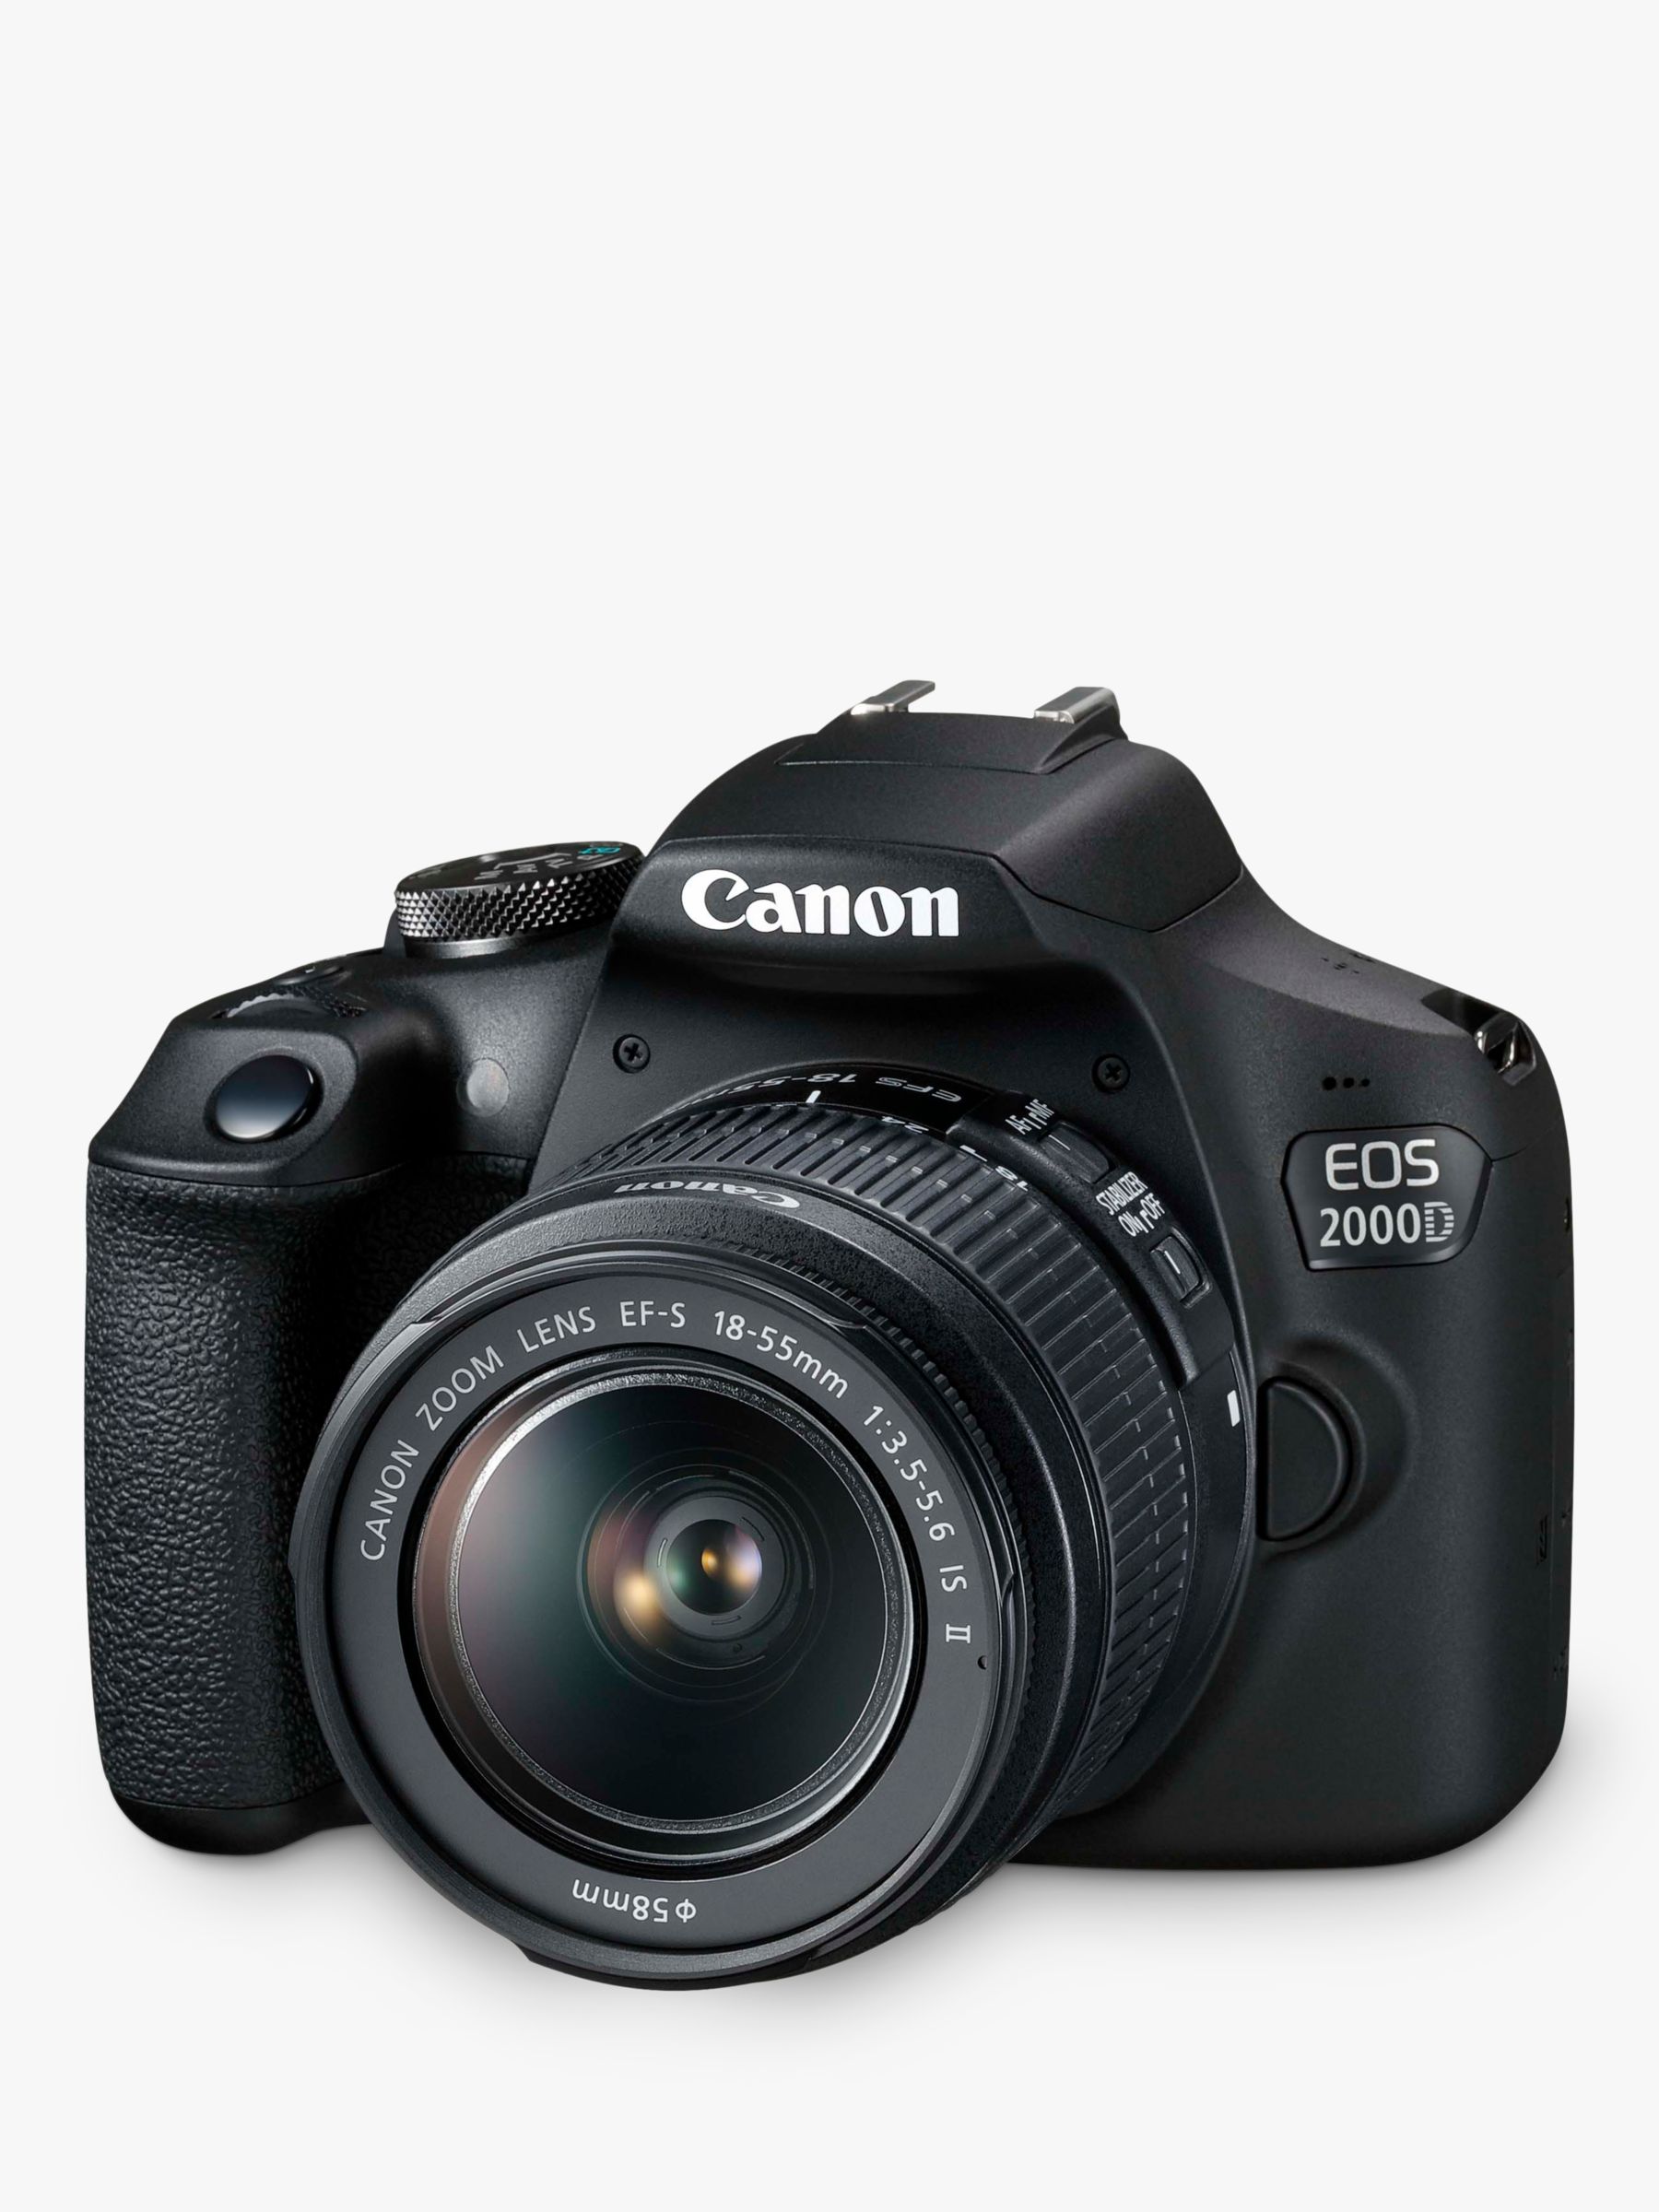 Image of Canon EOS 2000D Digital SLR Camera with 1855mm Lens and 50mm Lens 1080p Full HD 241MP WiFi NFC Optical Viewfinder 3 LCD Screen Double Lens Kit Black